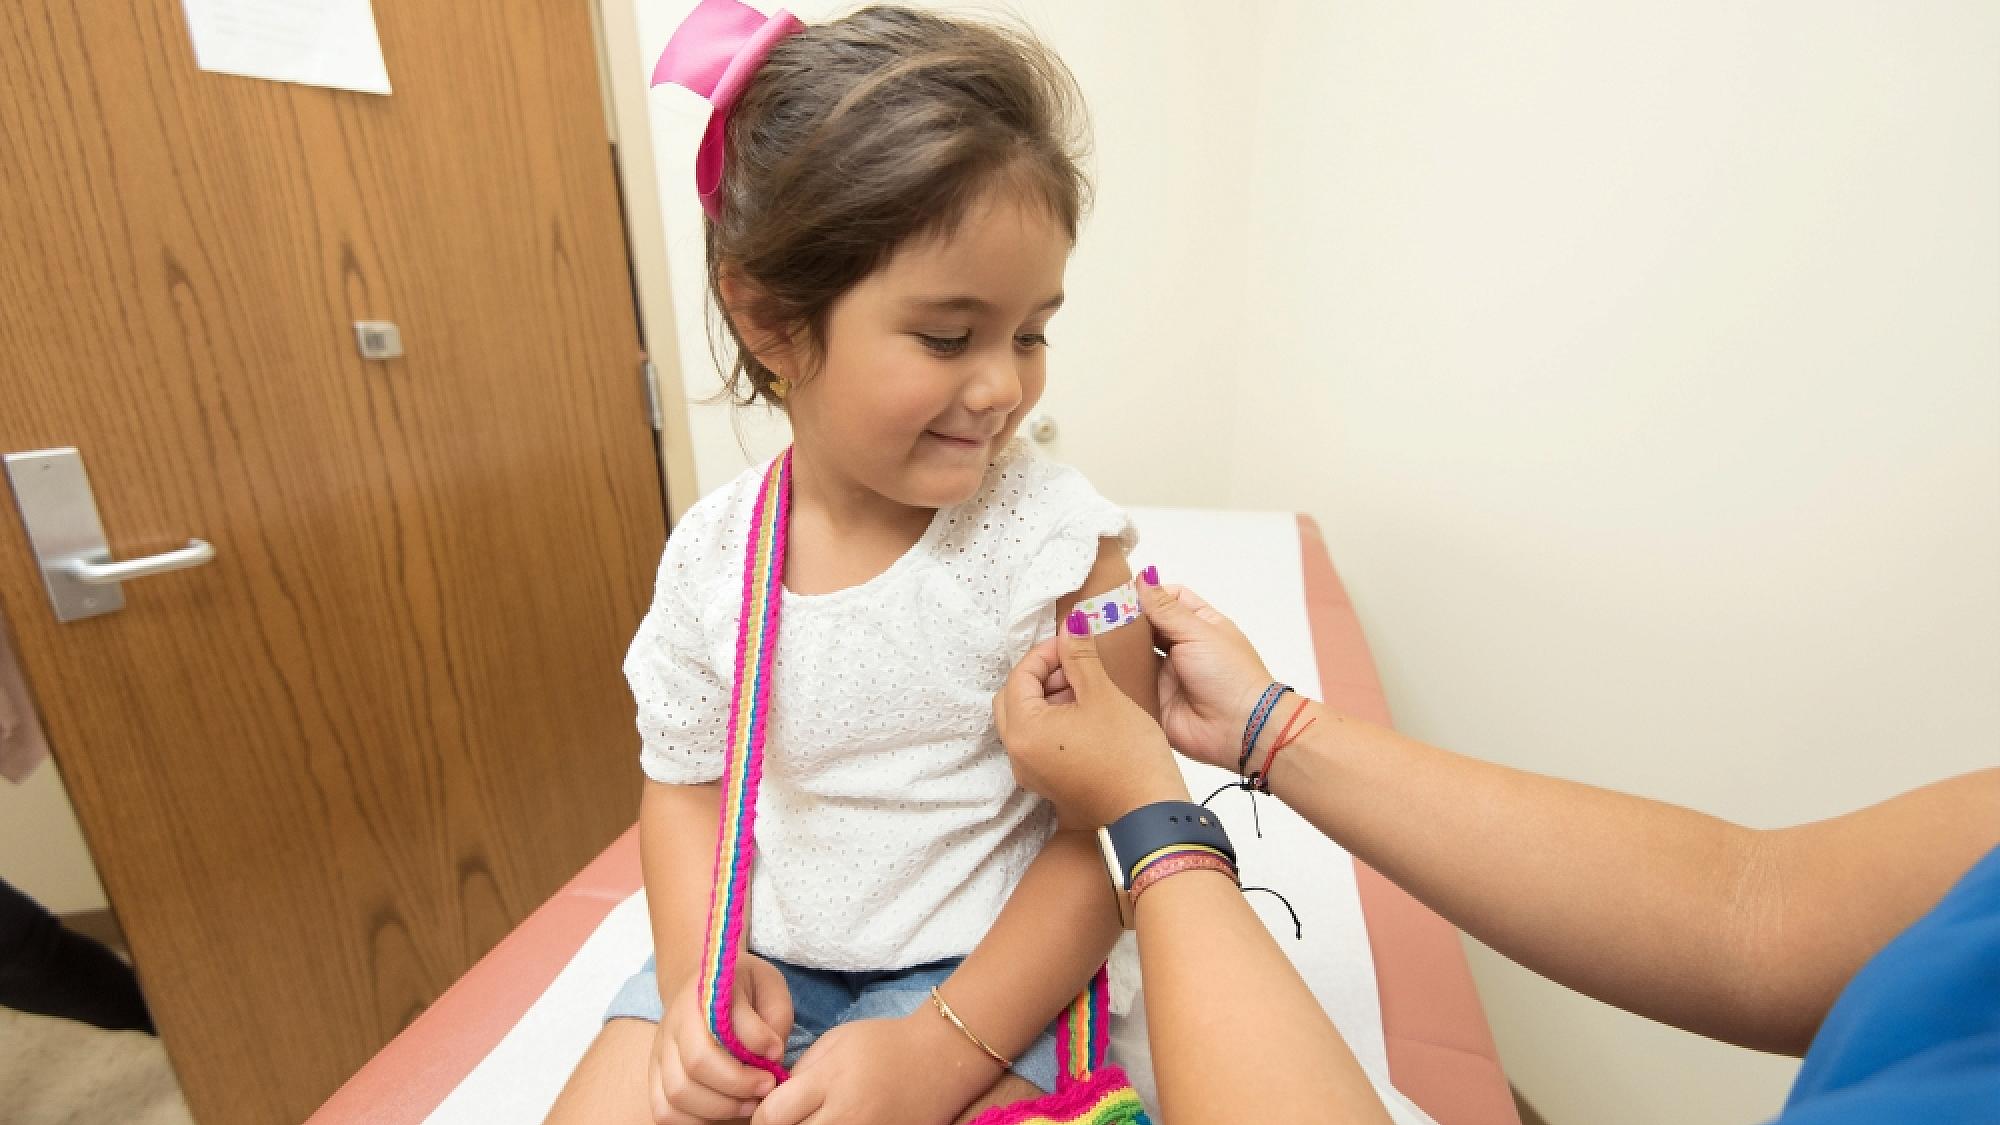 A child receives a band-aid from a nurse, beside the UofU Health logo